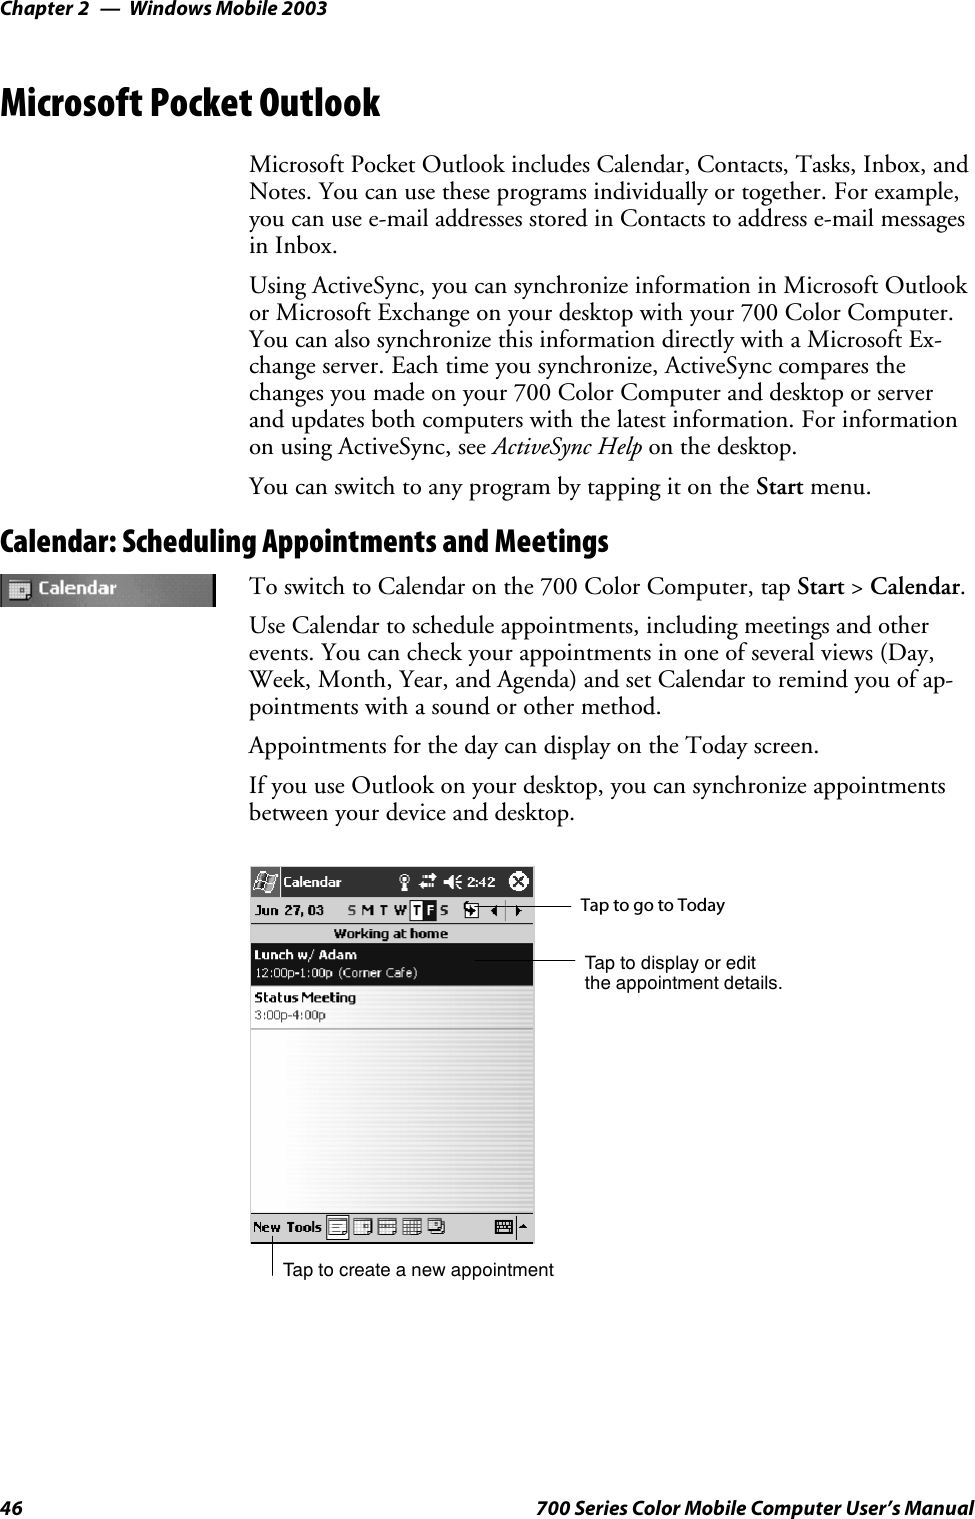 Windows Mobile 2003Chapter —246 700 Series Color Mobile Computer User’s ManualMicrosoft Pocket OutlookMicrosoft Pocket Outlook includes Calendar, Contacts, Tasks, Inbox, andNotes. You can use these programs individually or together. For example,youcanusee-mailaddressesstoredinContactstoaddresse-mailmessagesin Inbox.Using ActiveSync, you can synchronize information in Microsoft Outlookor Microsoft Exchange on your desktop with your 700 Color Computer.You can also synchronize this information directly with a Microsoft Ex-change server. Each time you synchronize, ActiveSync compares thechanges you made on your 700 Color Computer and desktop or serverand updates both computers with the latest information. For informationon using ActiveSync, see ActiveSync Help on the desktop.You can switch to any program by tapping it on the Start menu.Calendar: Scheduling Appointments and MeetingsTo switch to Calendar on the 700 Color Computer, tap Start &gt;Calendar.Use Calendar to schedule appointments, including meetings and otherevents. You can check your appointments in one of several views (Day,Week, Month, Year, and Agenda) and set Calendar to remind you of ap-pointments with a sound or other method.Appointments for the day can display on the Today screen.If you use Outlook on your desktop, you can synchronize appointmentsbetween your device and desktop.Tap to create a new appointmentTaptogotoTodayTap to display or editthe appointment details.